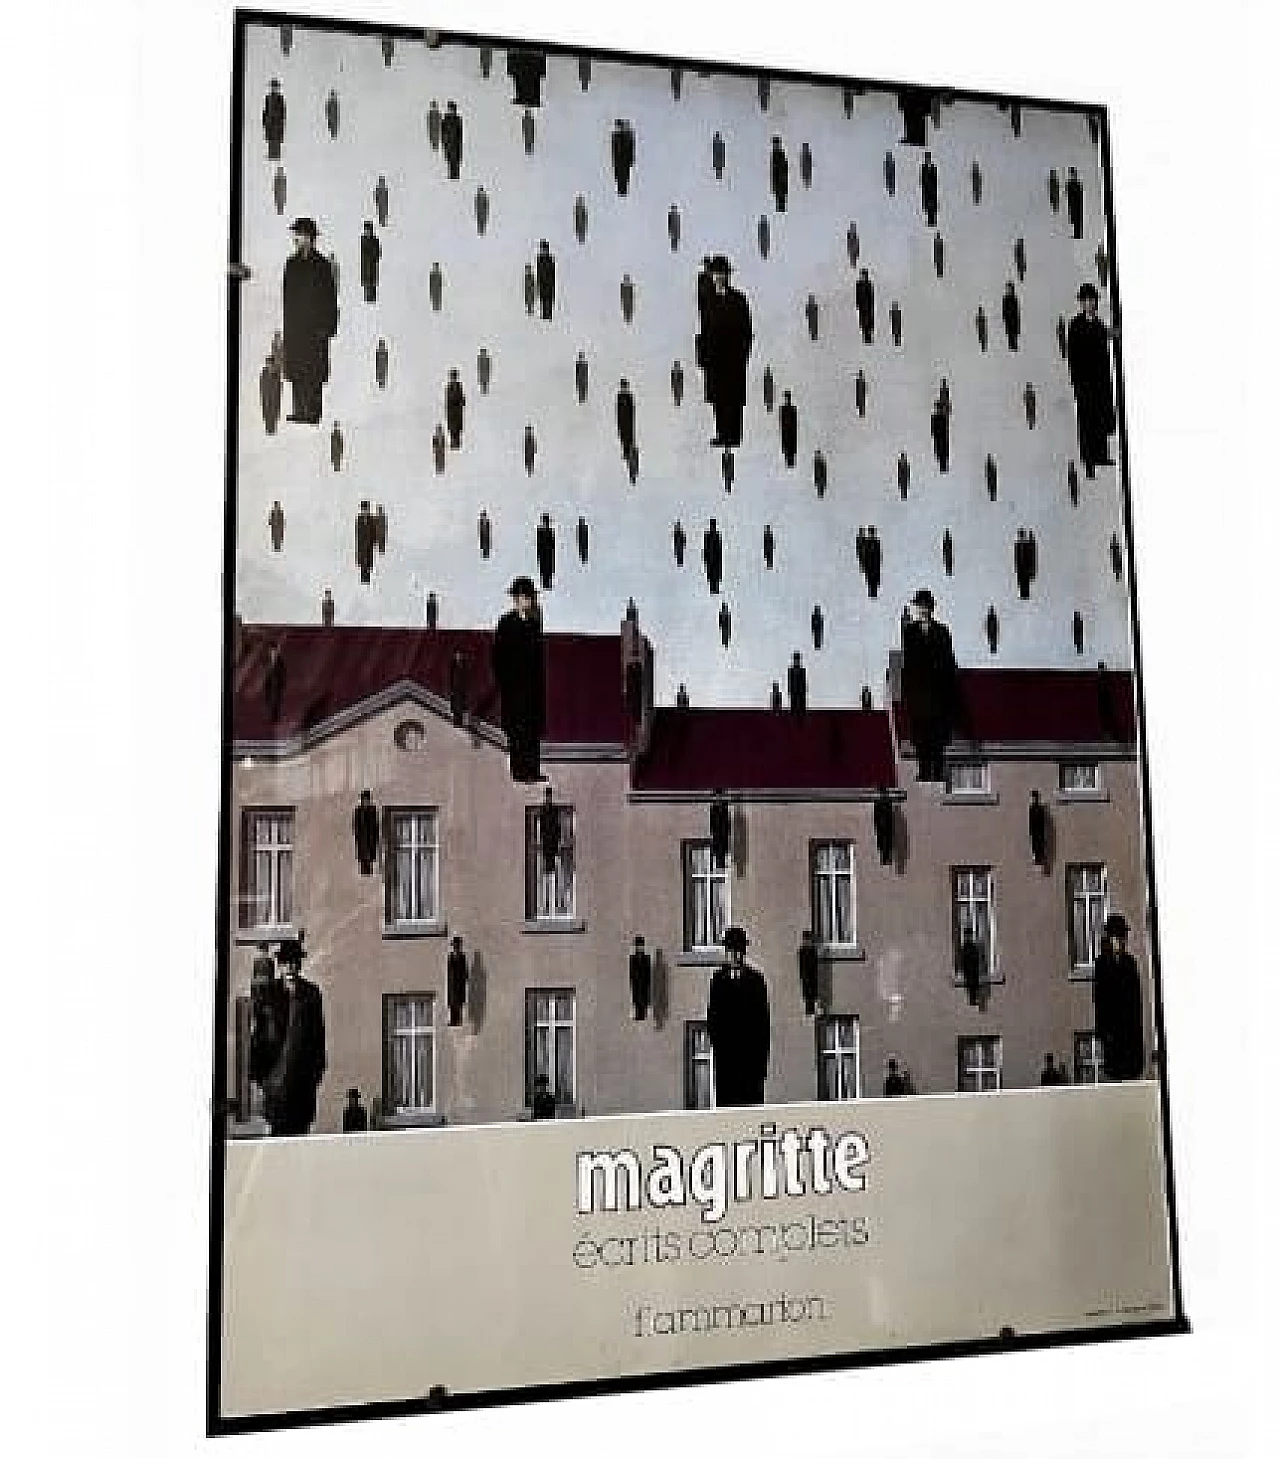 Poster for Magritte écrits complets book by Editions Flammarion, 1990s 5